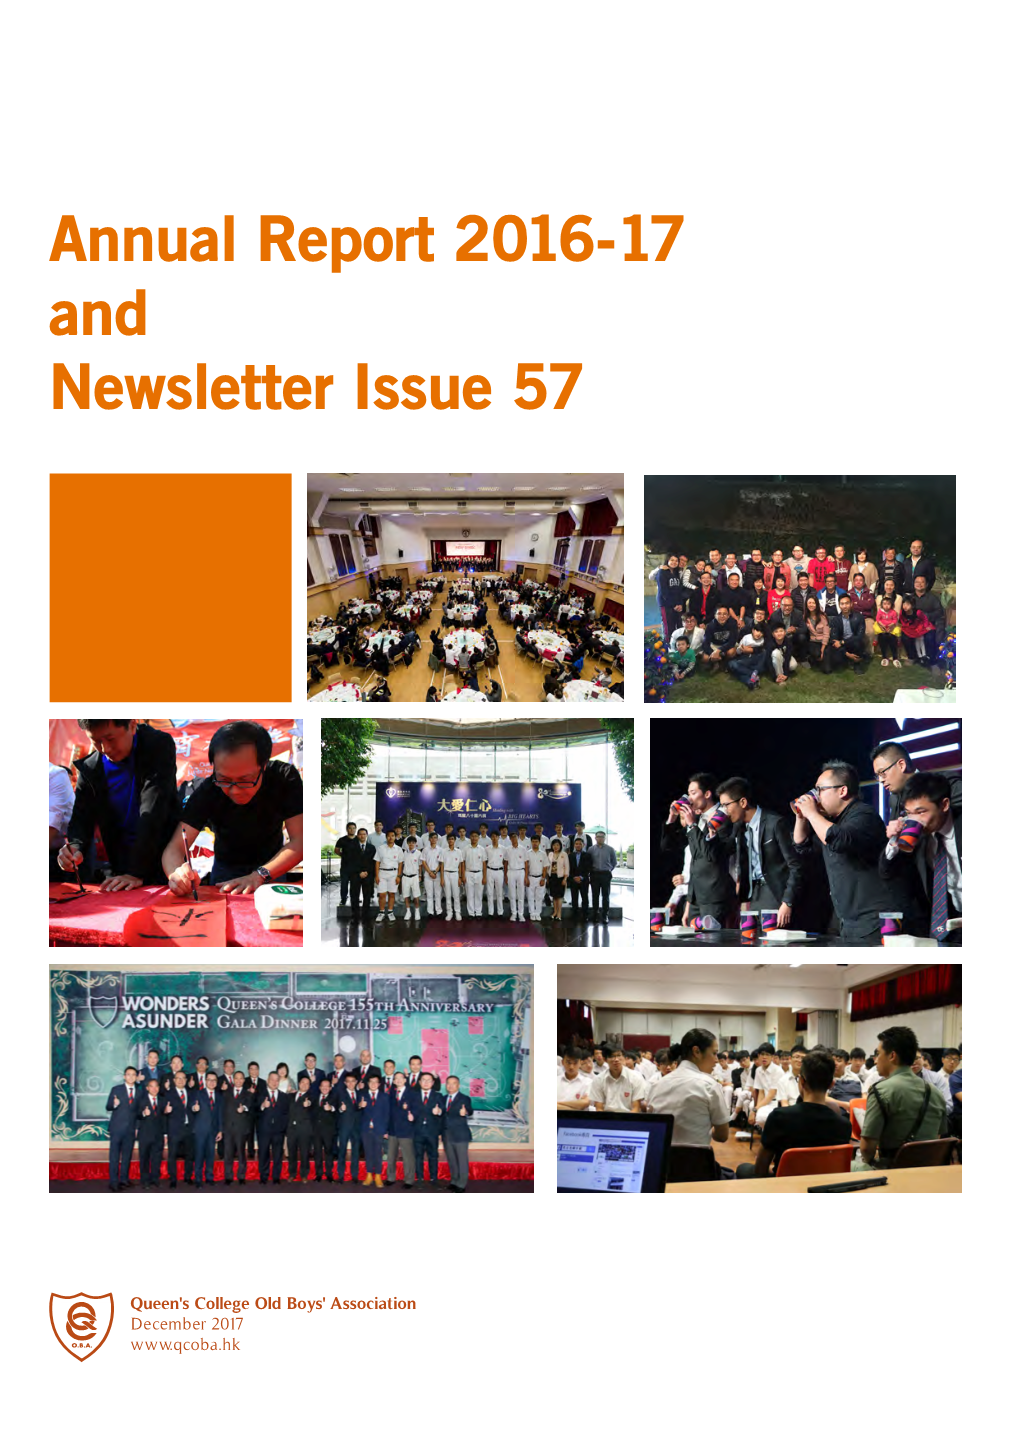 Annual Report 2016-17 and Newsletter Issue 57